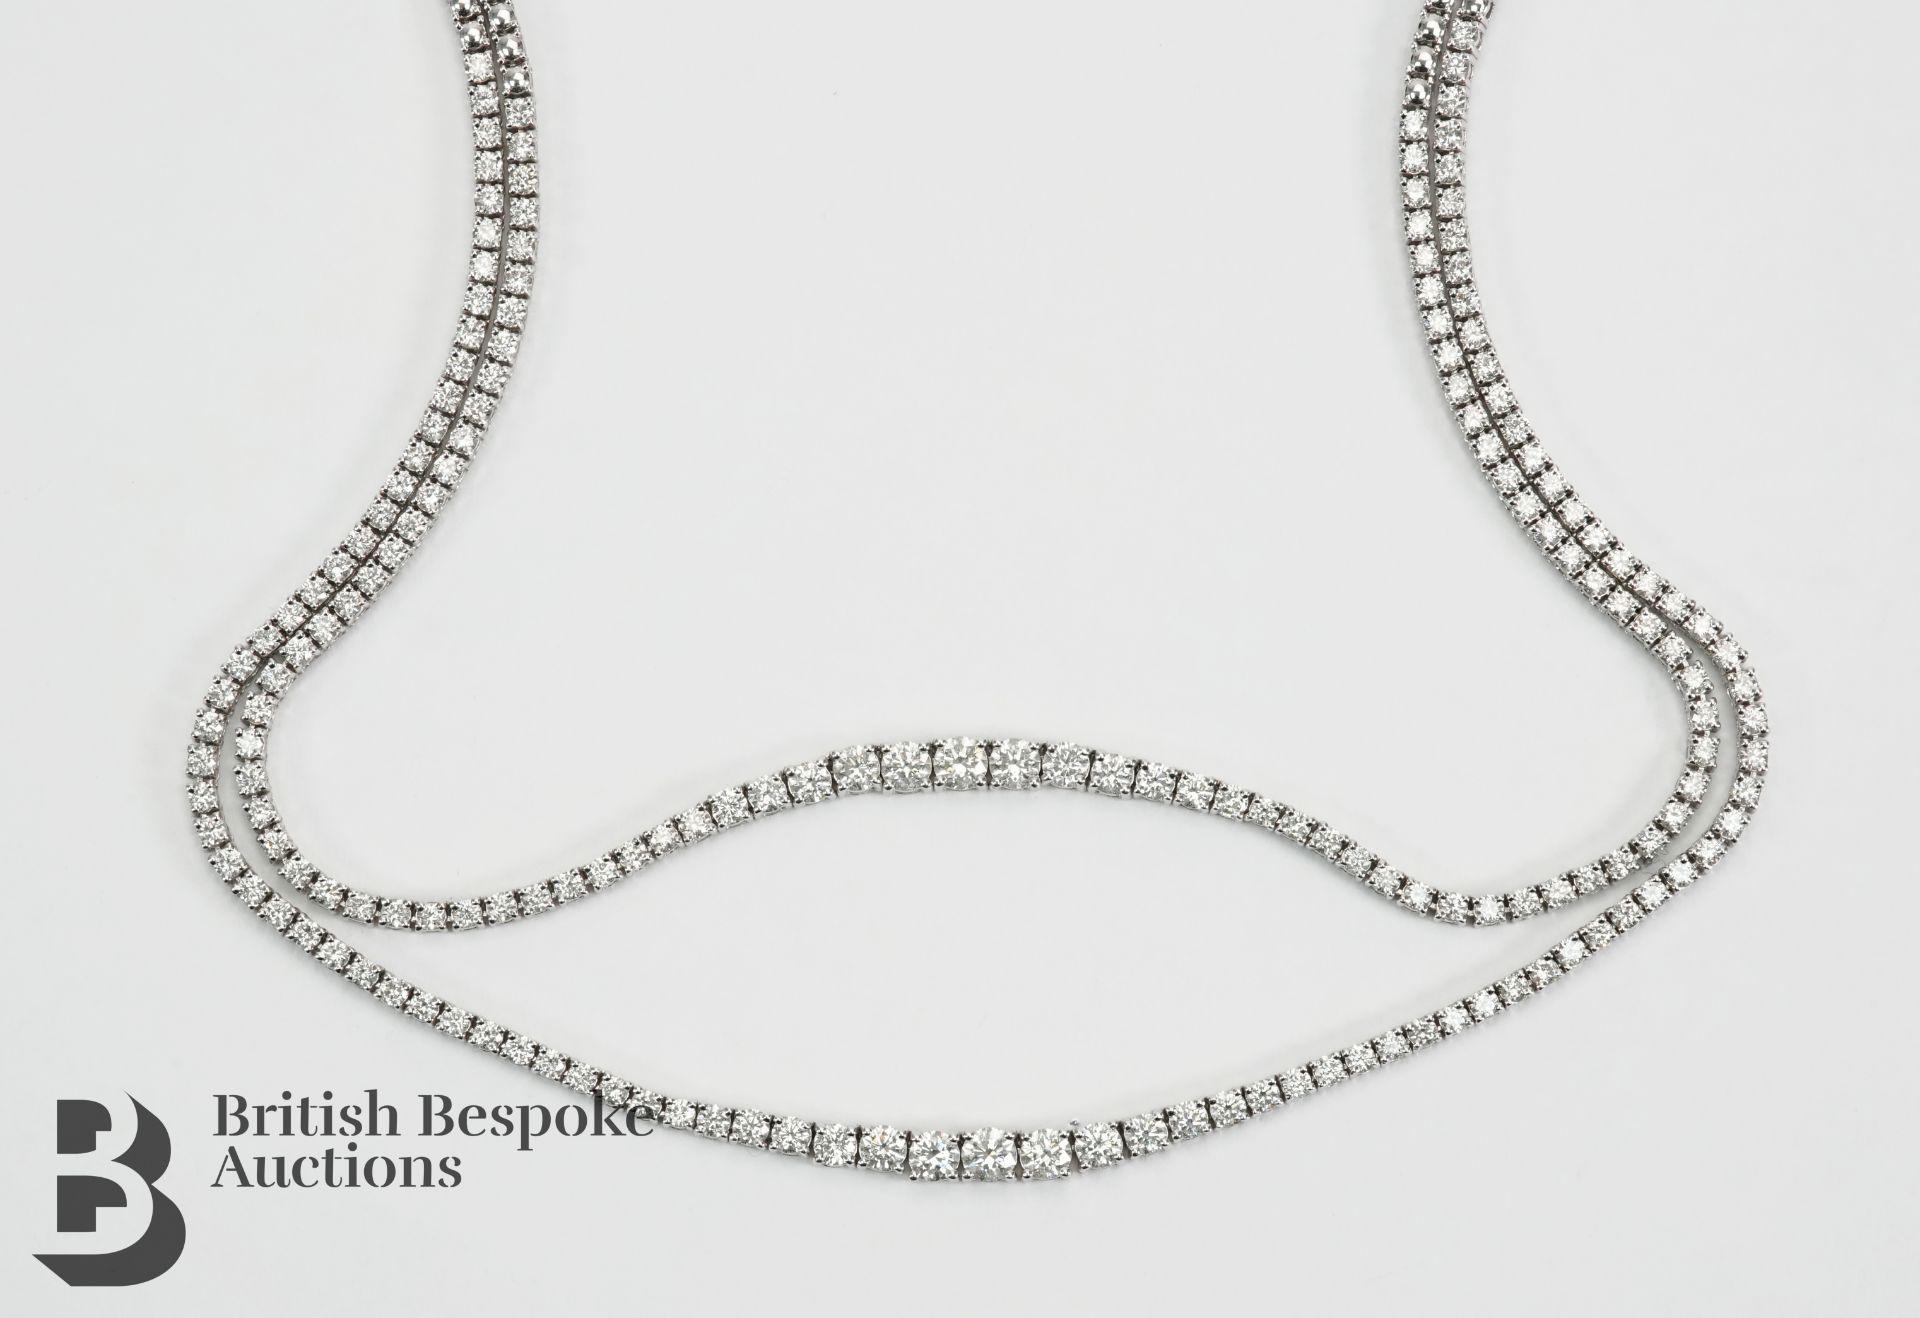 18ct White Gold 7.4ct Diamond Double Strand Necklace - Image 7 of 9